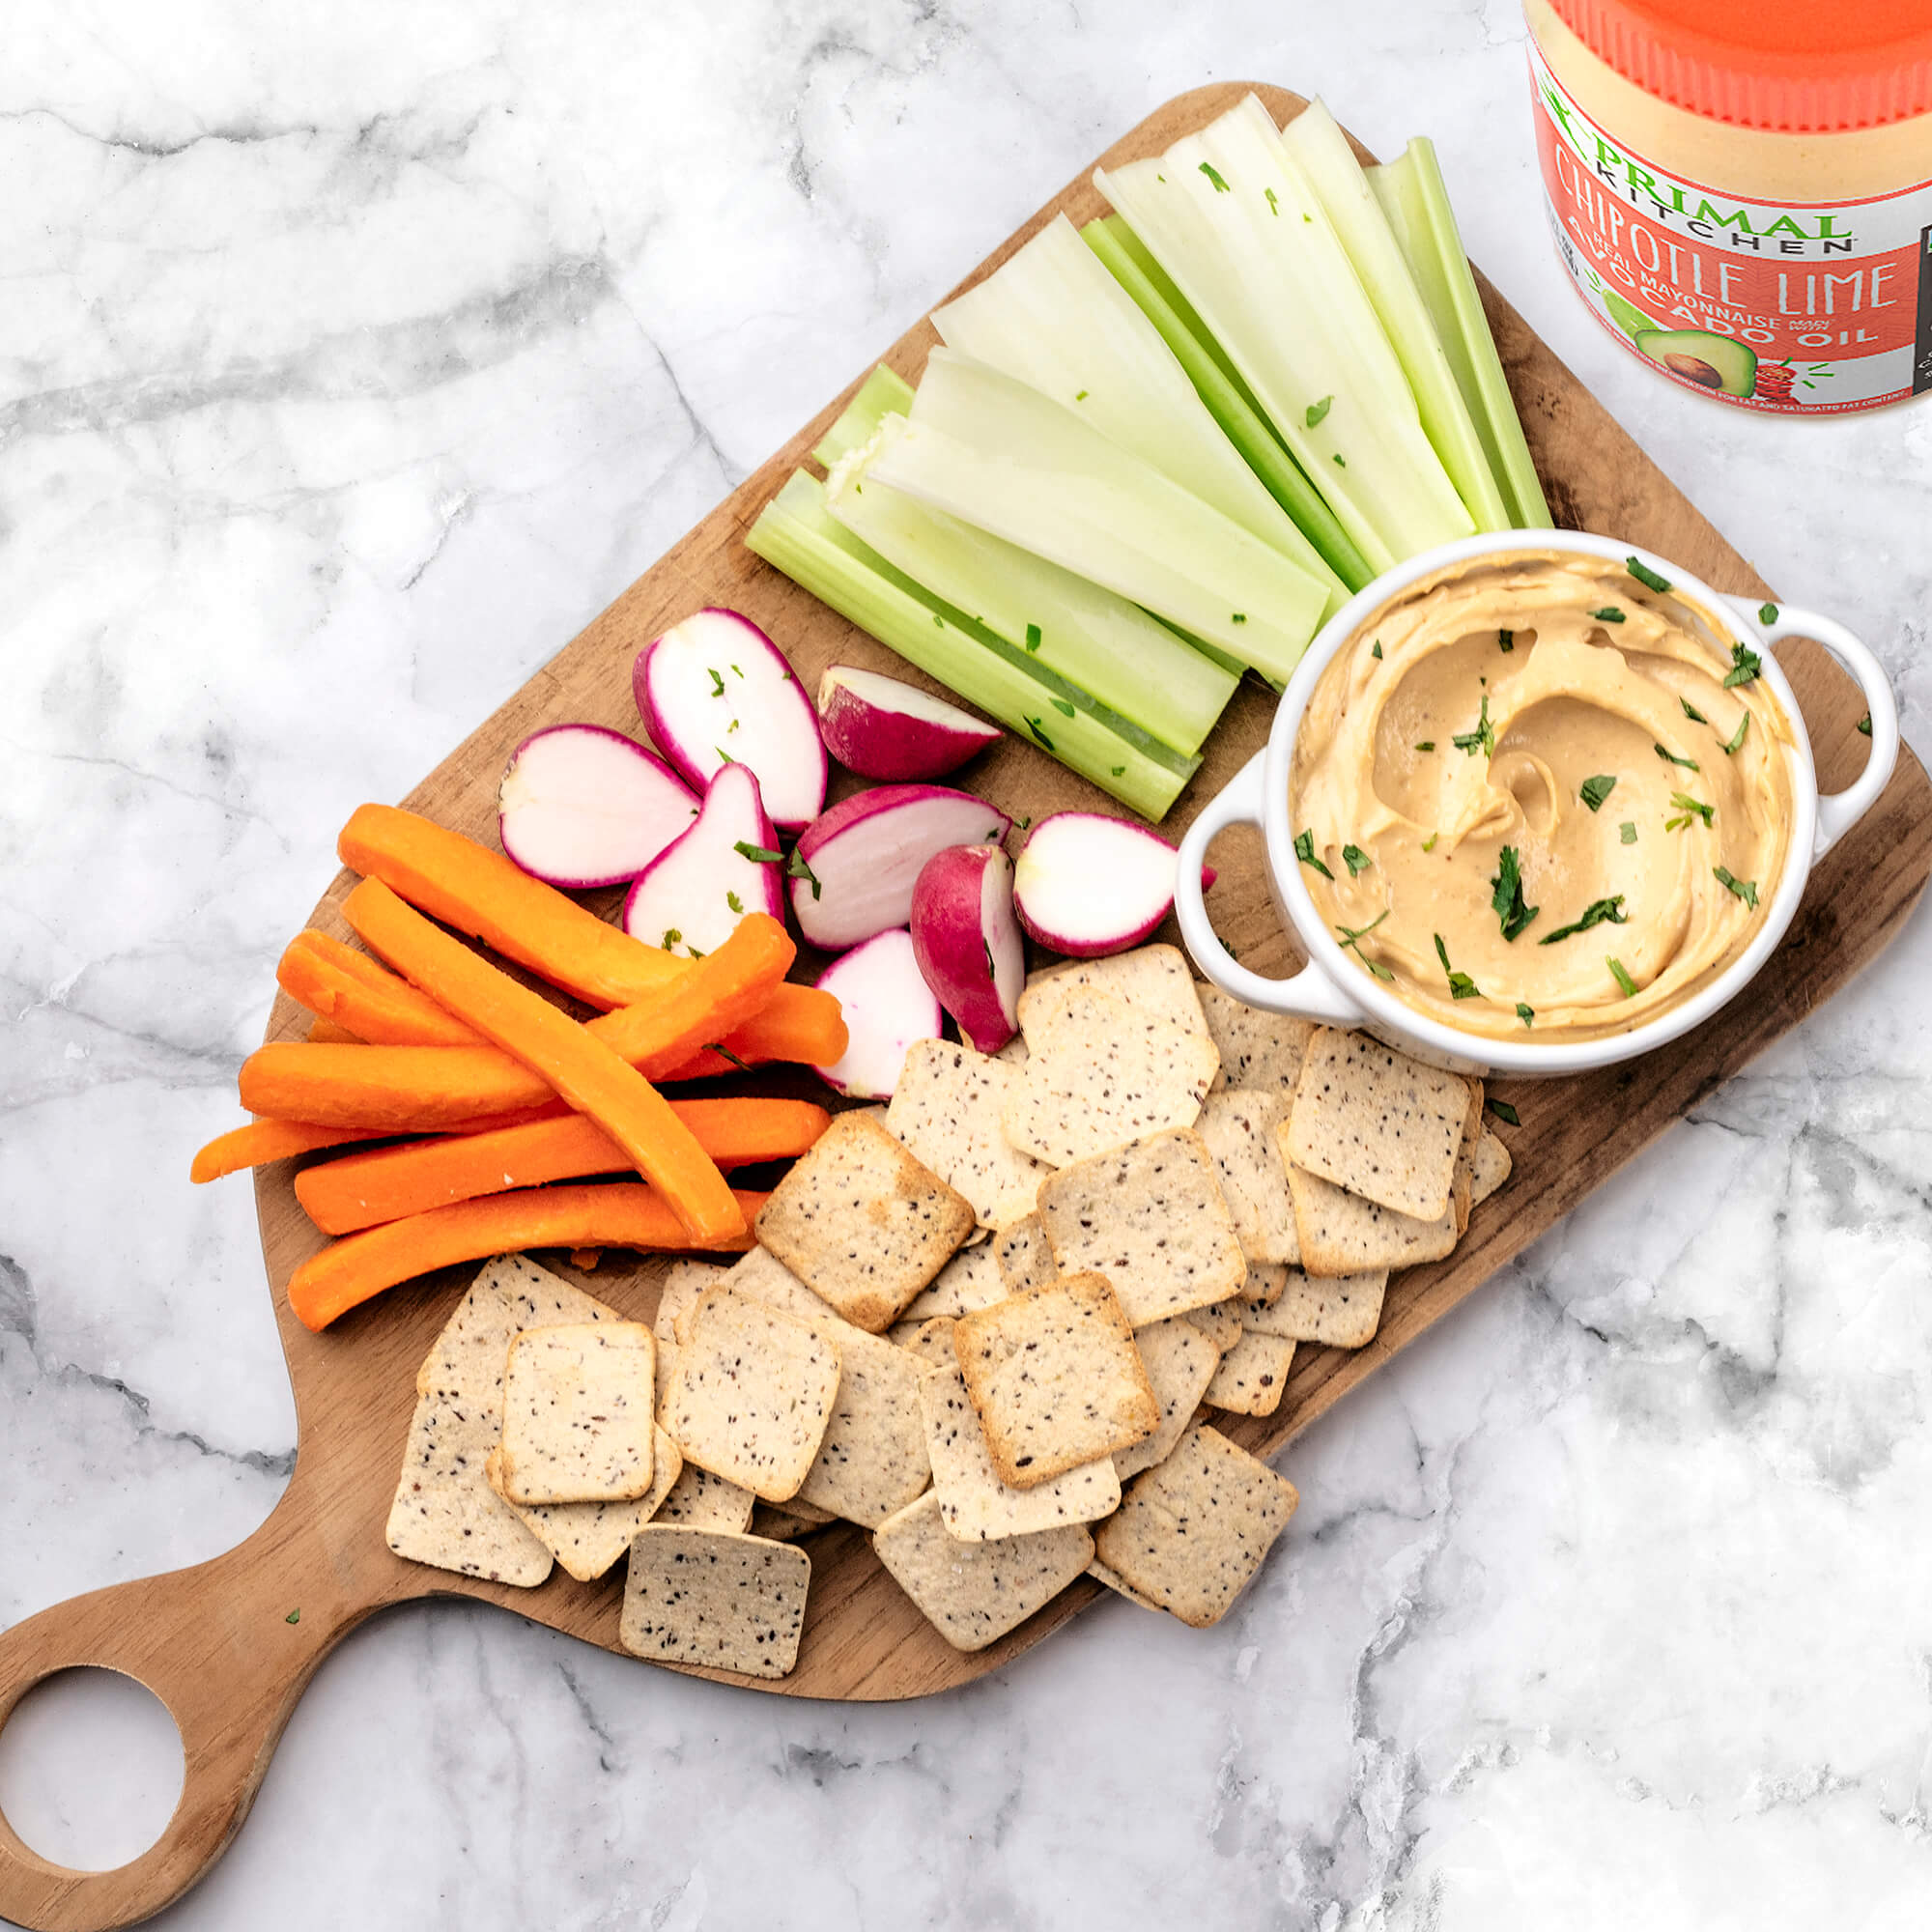 Snack spread of carrots, crackers, radishes, celery and Primal Kitchen Chipotle Lime Mayo in a white car on a wooden board next to a jar of Primal Kitchen Chipotle Lime Mayo.